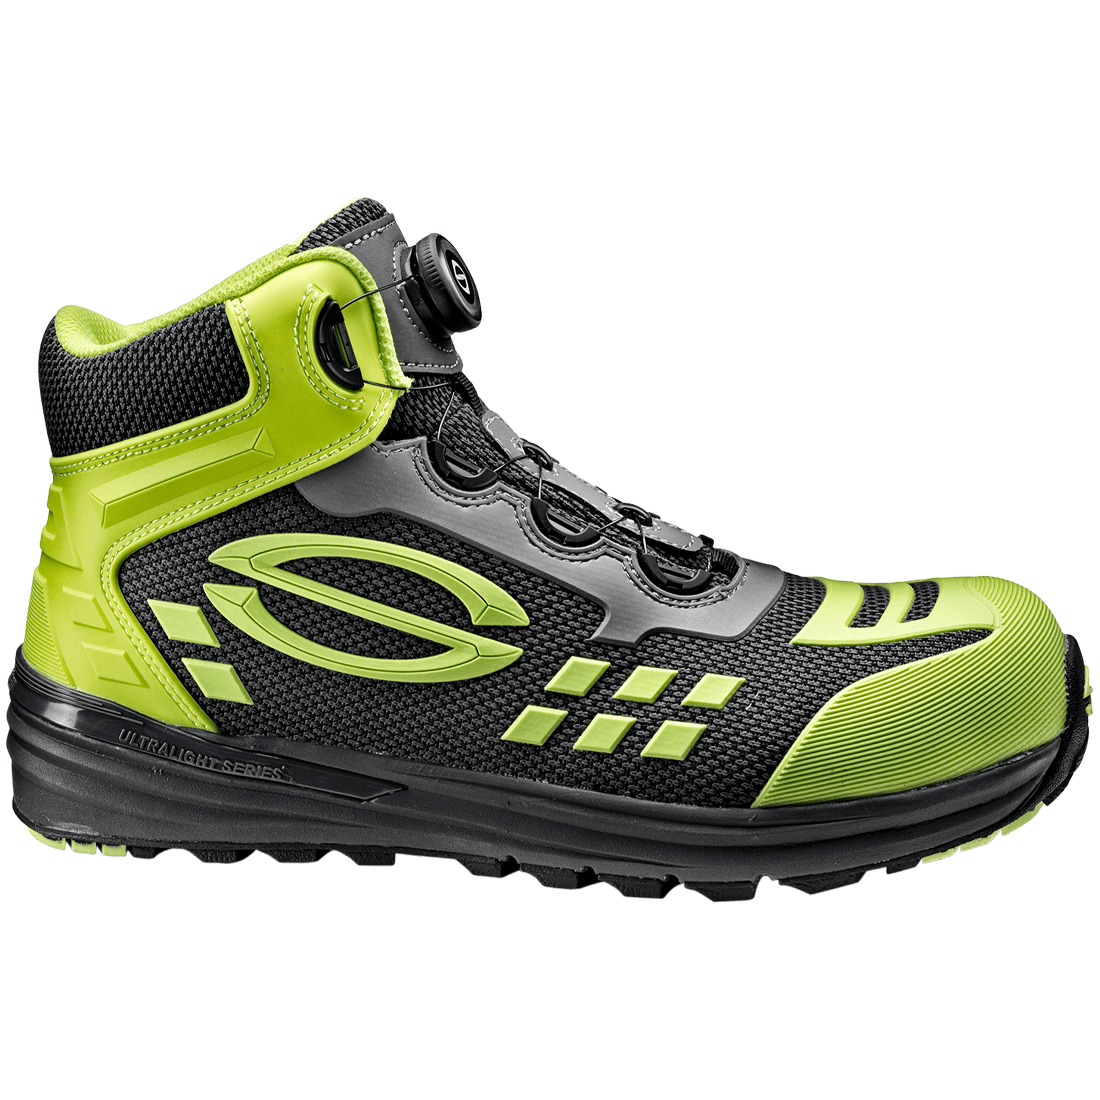 NEW OVERCAP BSF MAX SHOE | Sir Safety System